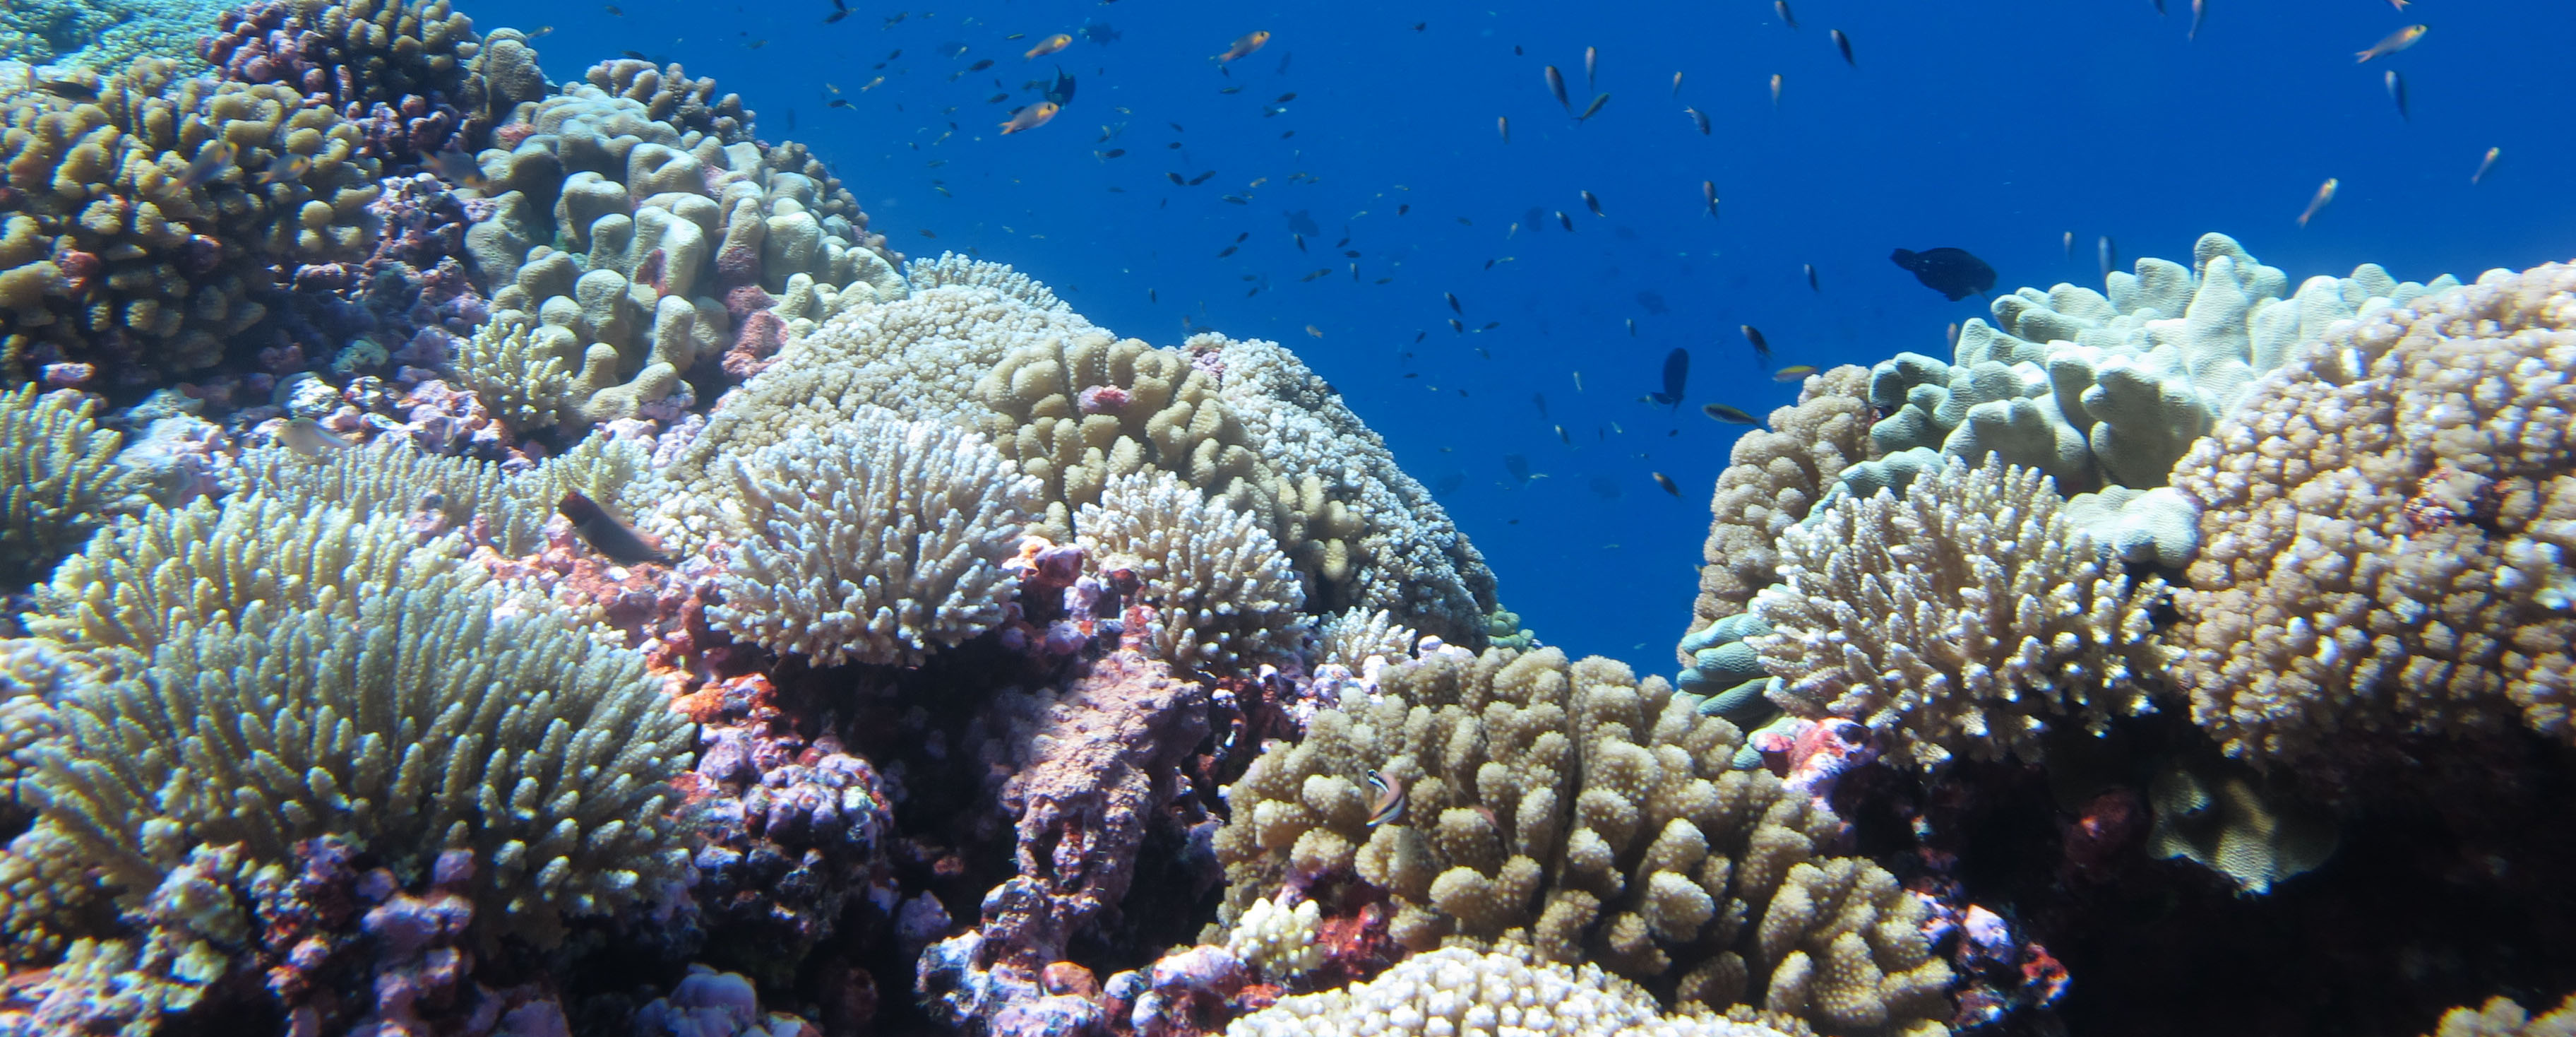 A coral reef in the Central Pacific. PC: Mike Fox 